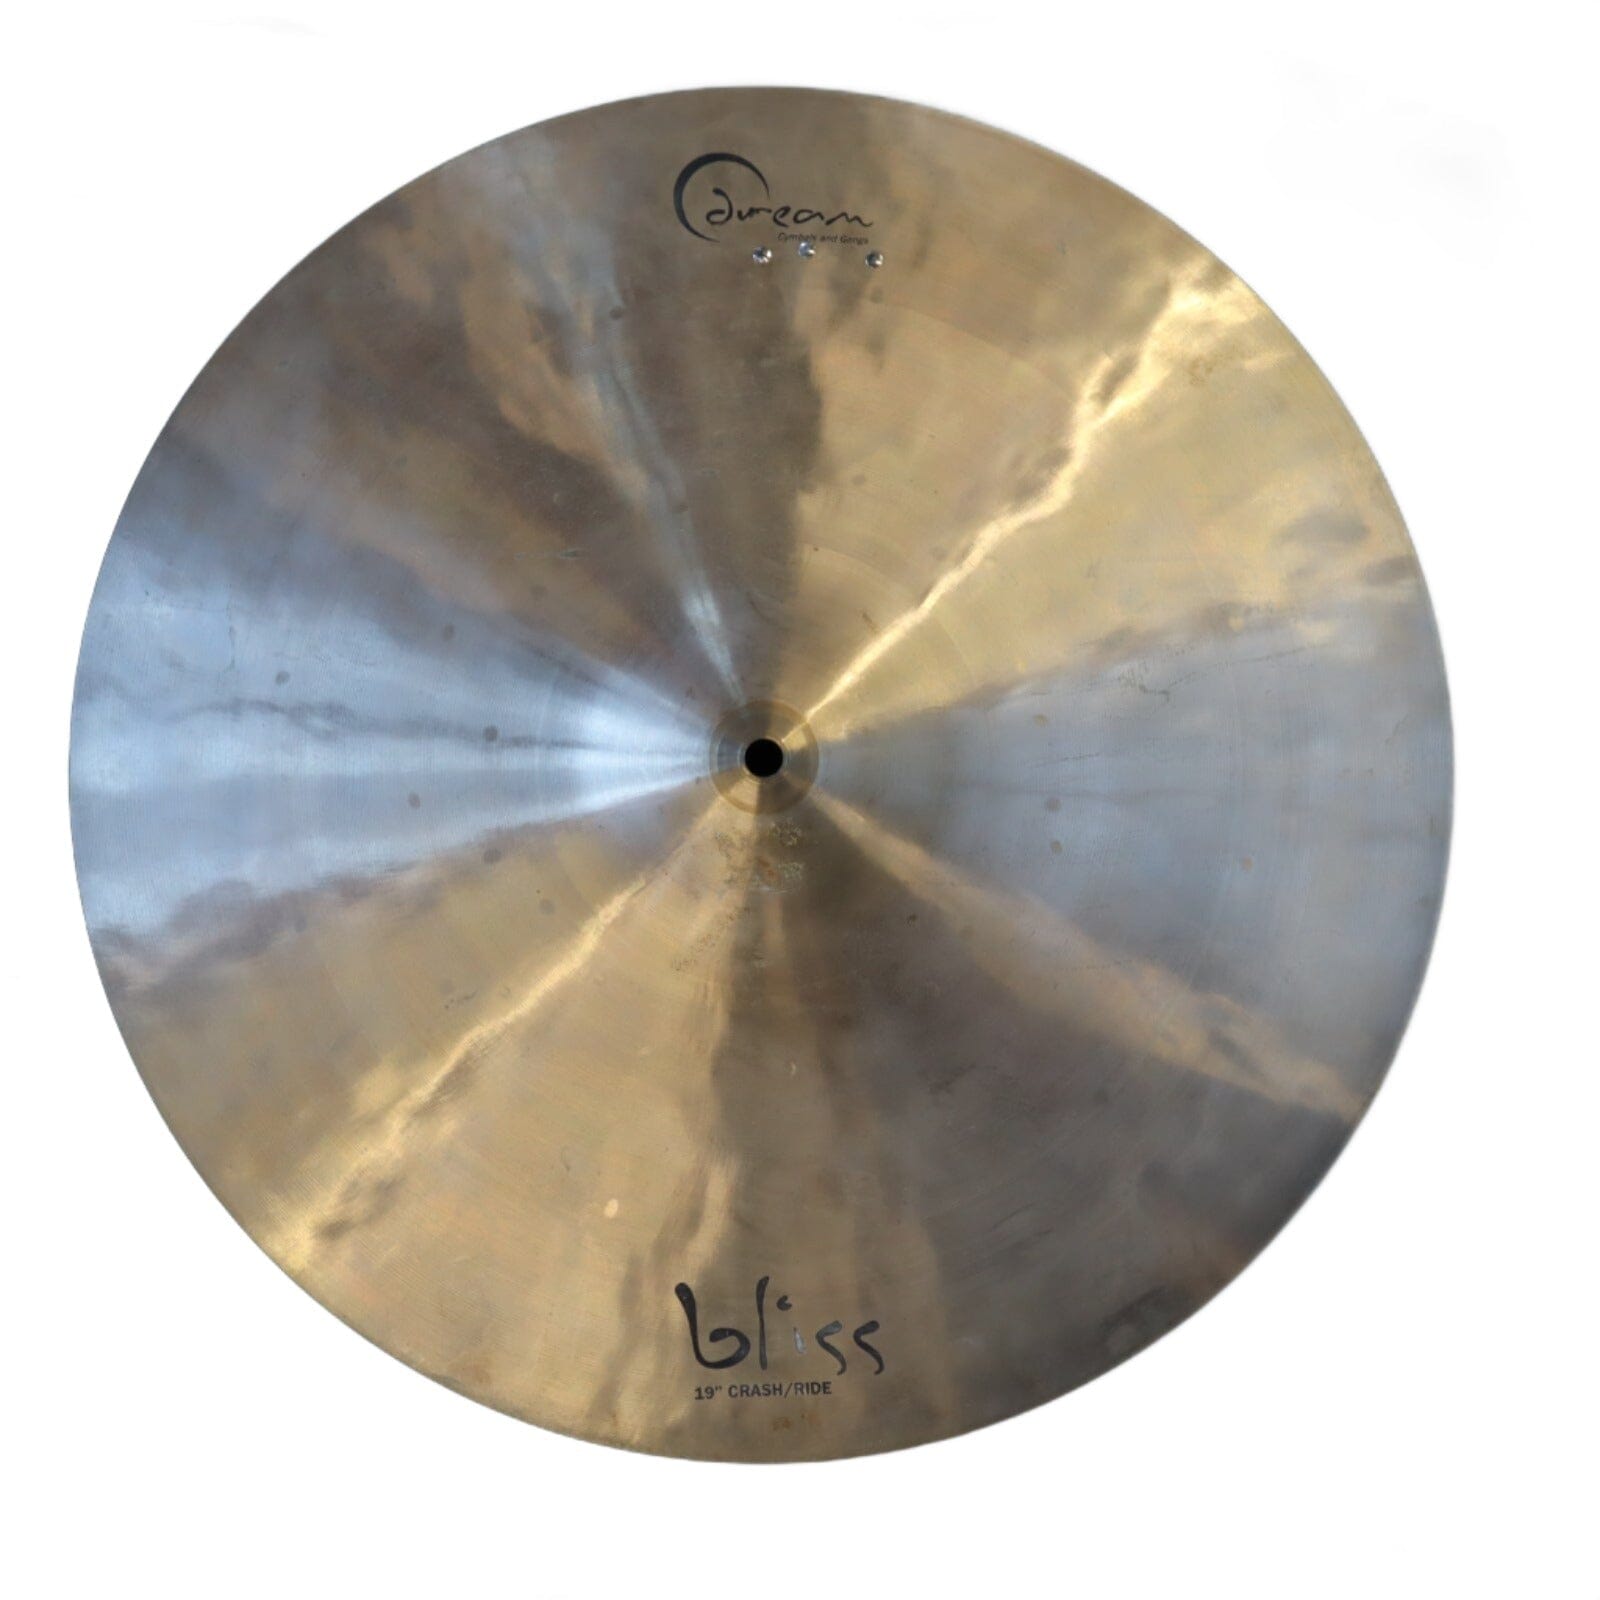 Dream 19" Rivet Crash Ride USED CYMBALS OTHER Dream 